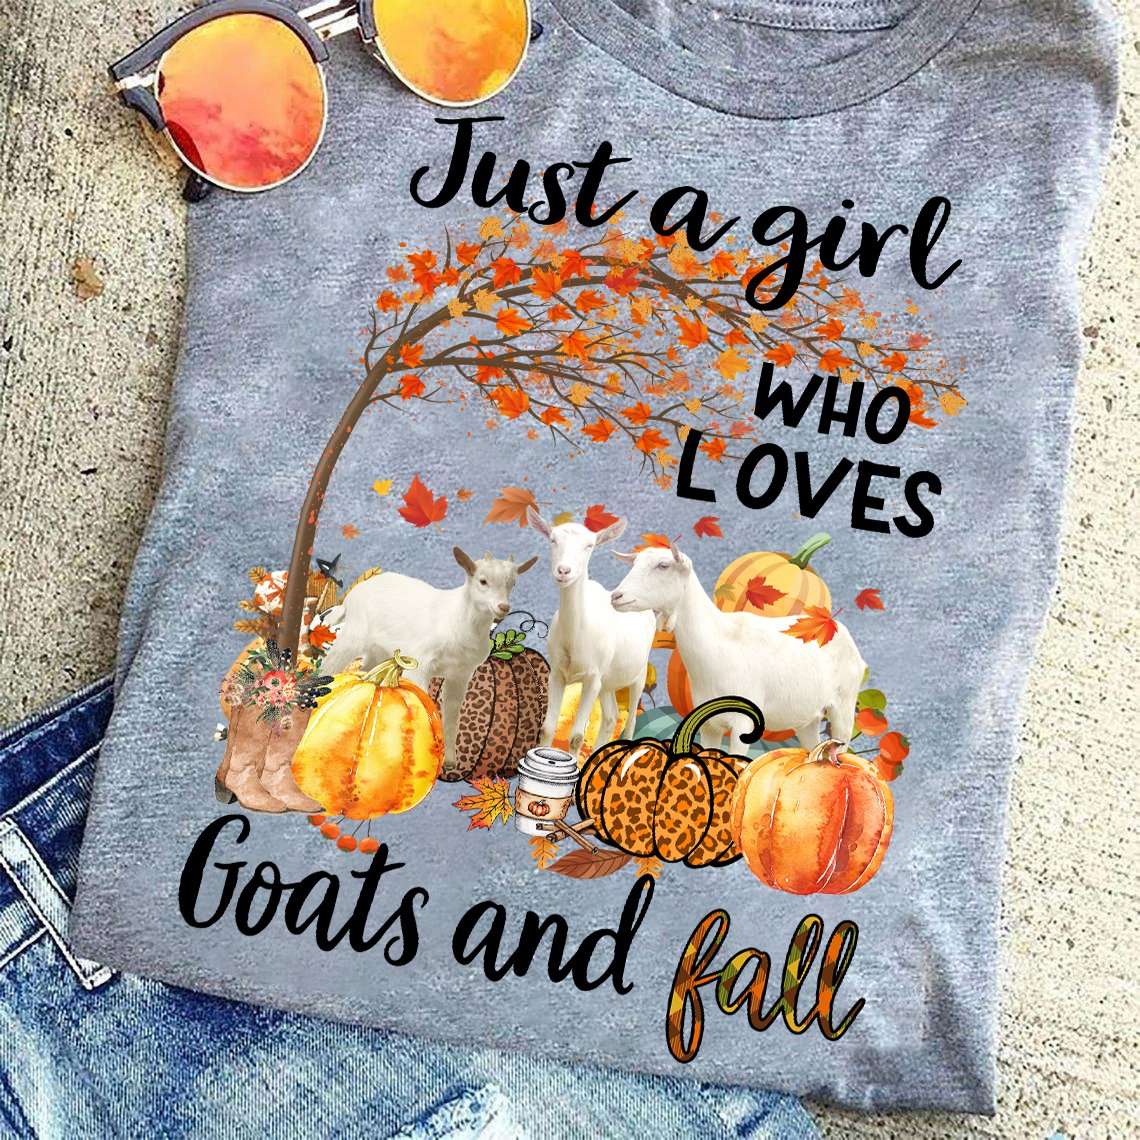 Girl Love Goats, Fall Season - Just a girl who loves goats and fall